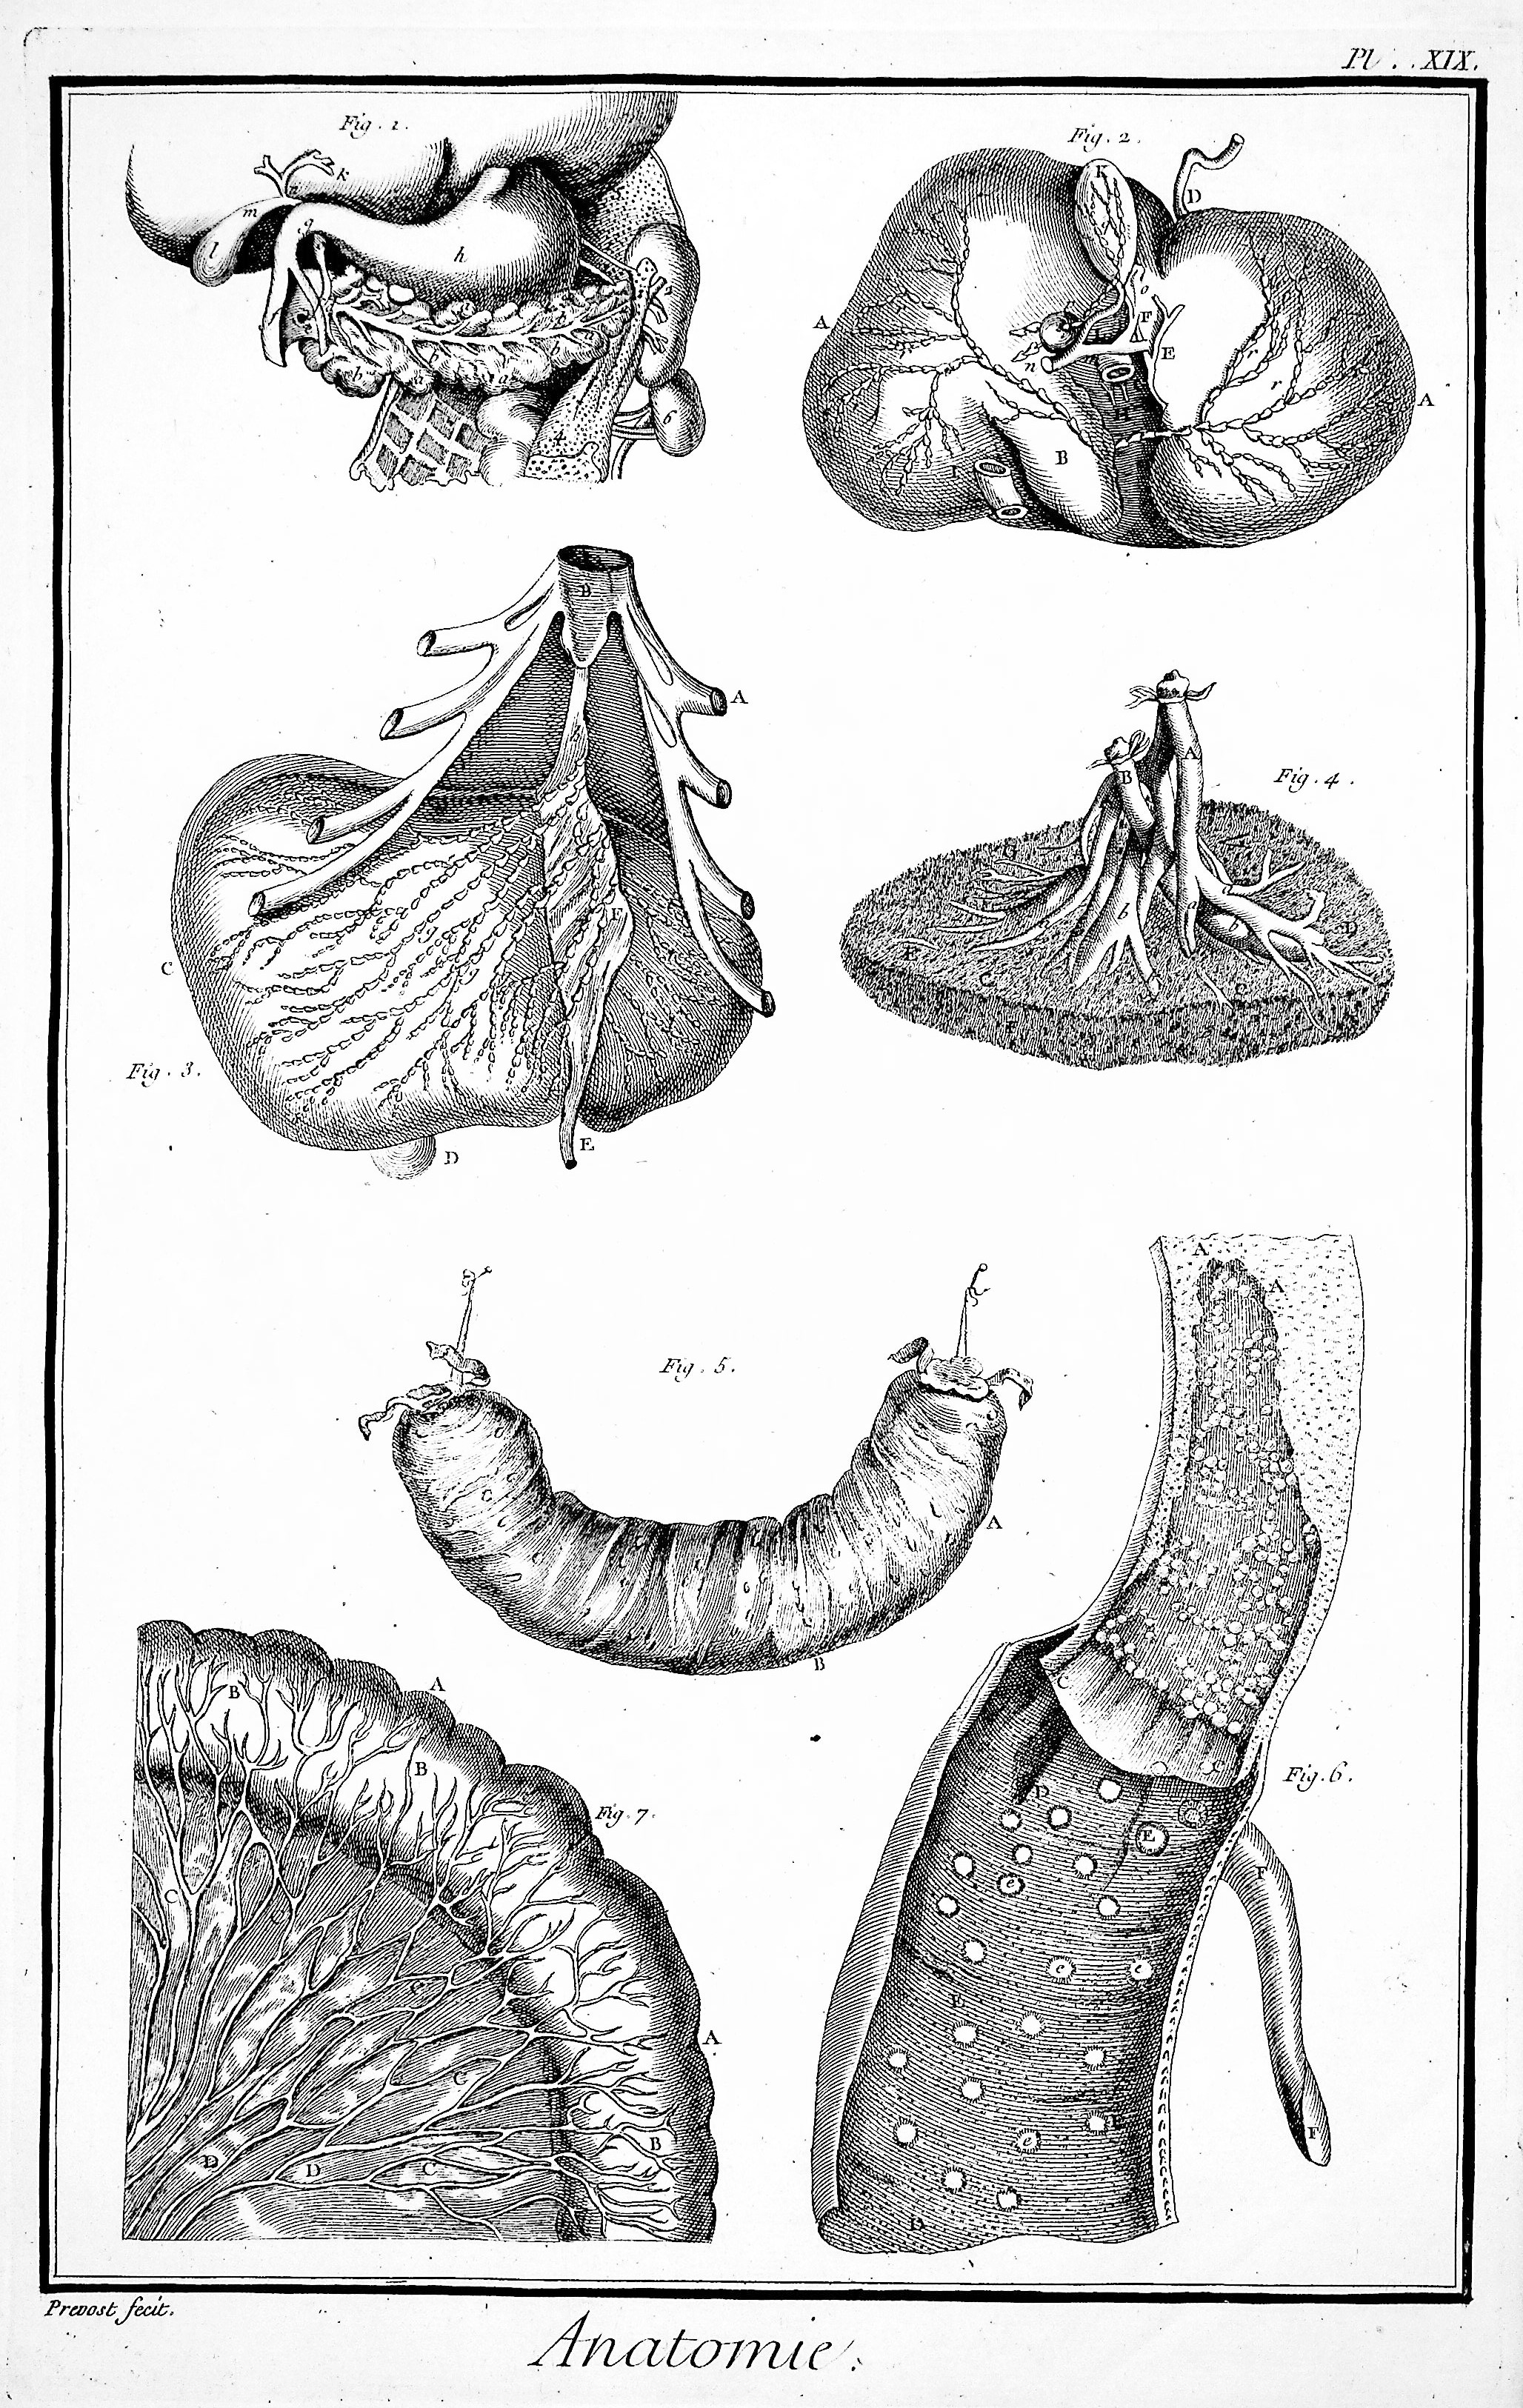 Image for Encyclopedie, Anatomie Plate XVIII. Some parts of the lower abdomen, after Haller; TOGETHER WITH Plate XIX. Parts of the stomach, the liver & neighboring parts, after Kulm